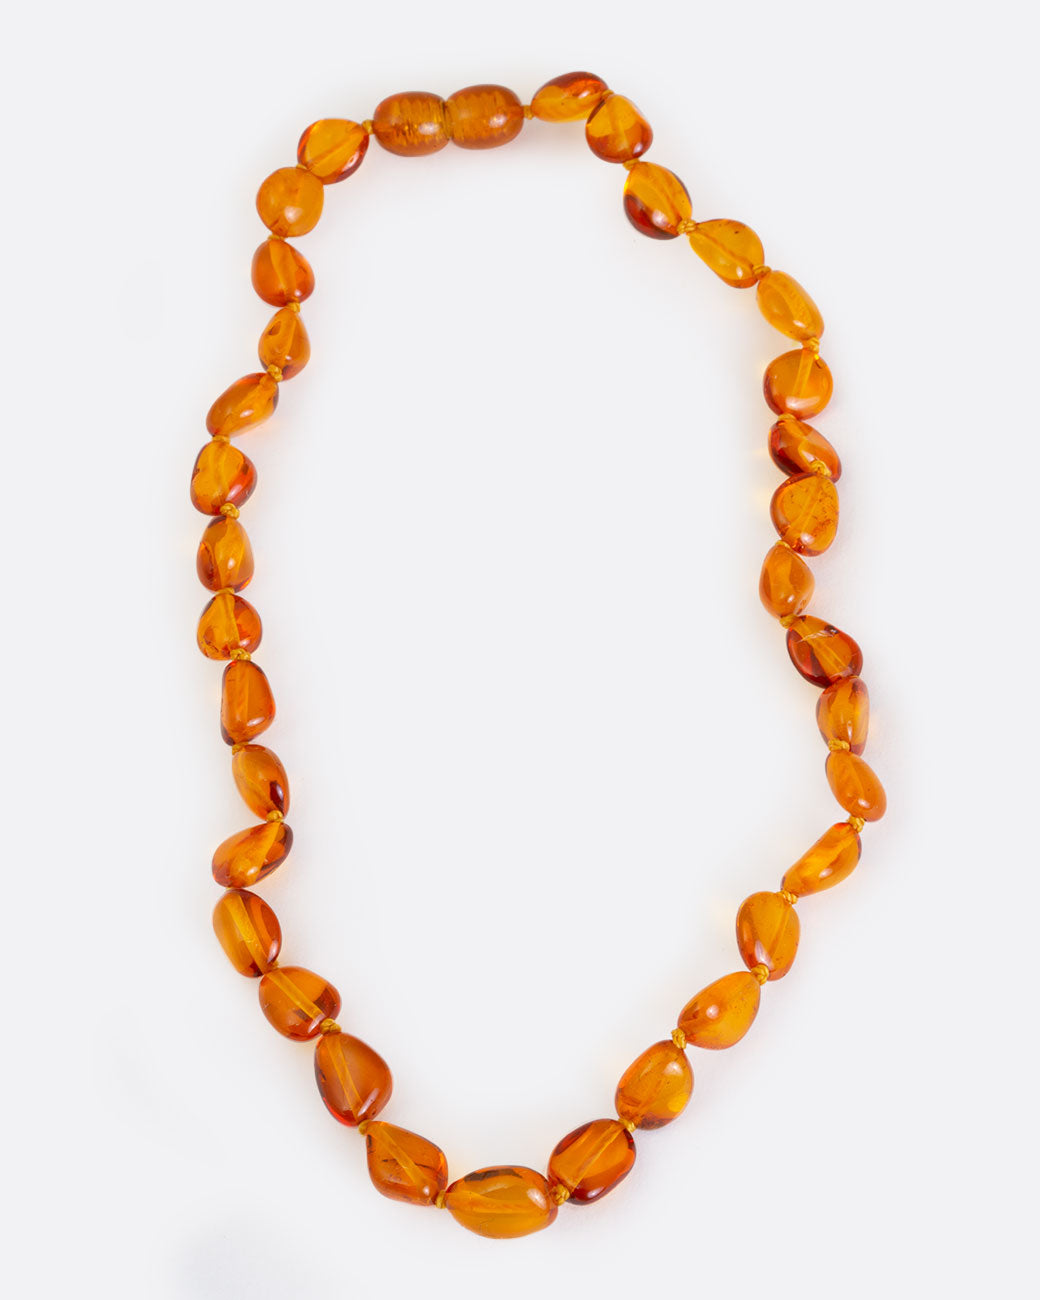 Cognac amber teething necklace, shown laying flat.